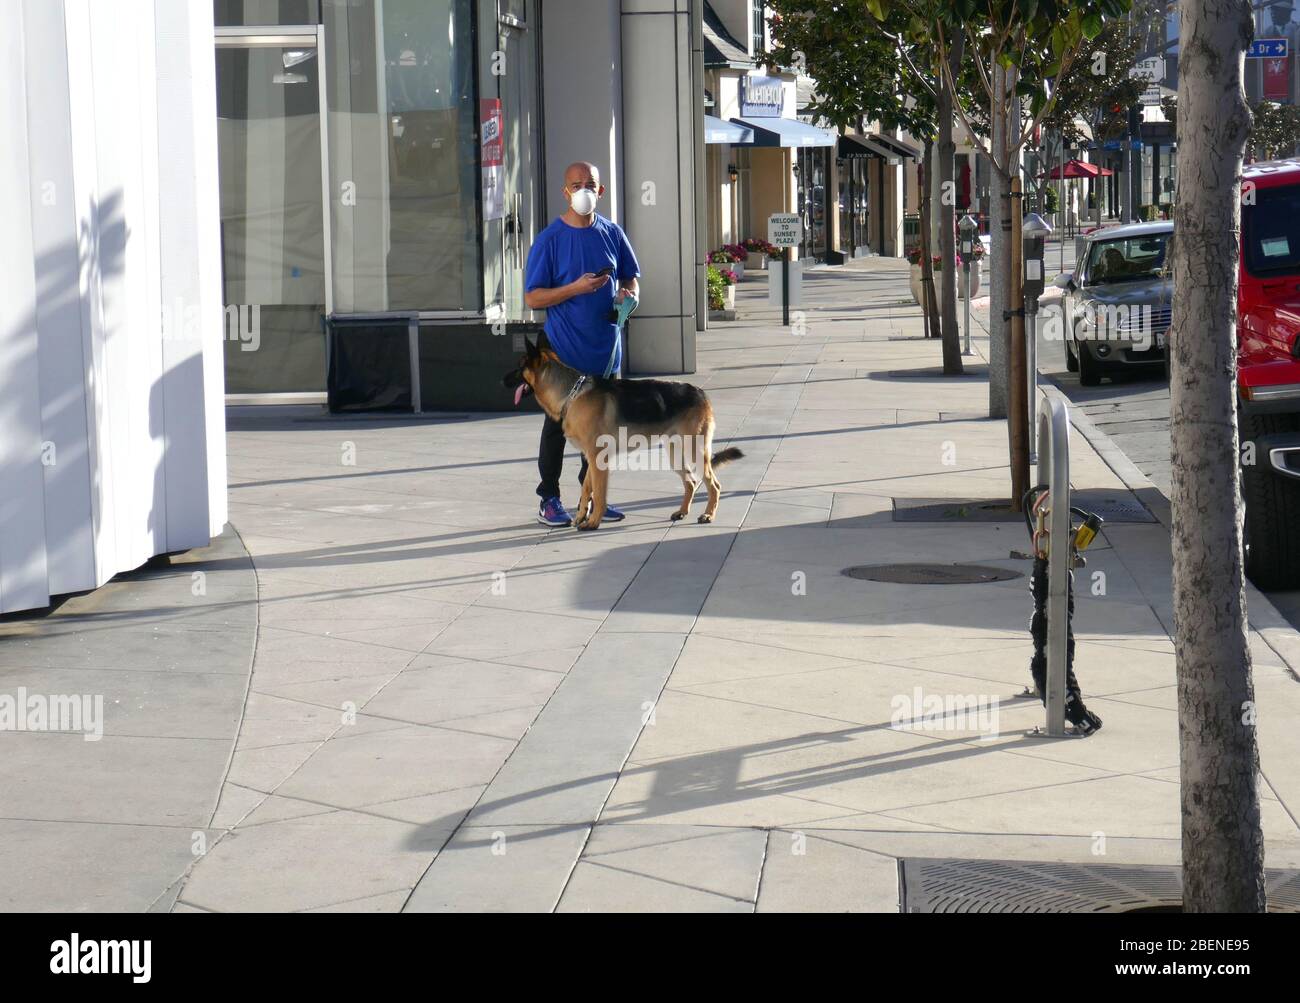 Los Angeles, California, USA 14th April 2020 A general view of atmosphere of man with face mask walking dog on street due to coronavirus covid-19 outbreak and social distancing and Stay At Home on April 14, 2020 in Los Angeles, California, USA. Photo by Barry King/Alamy Live News Stock Photo